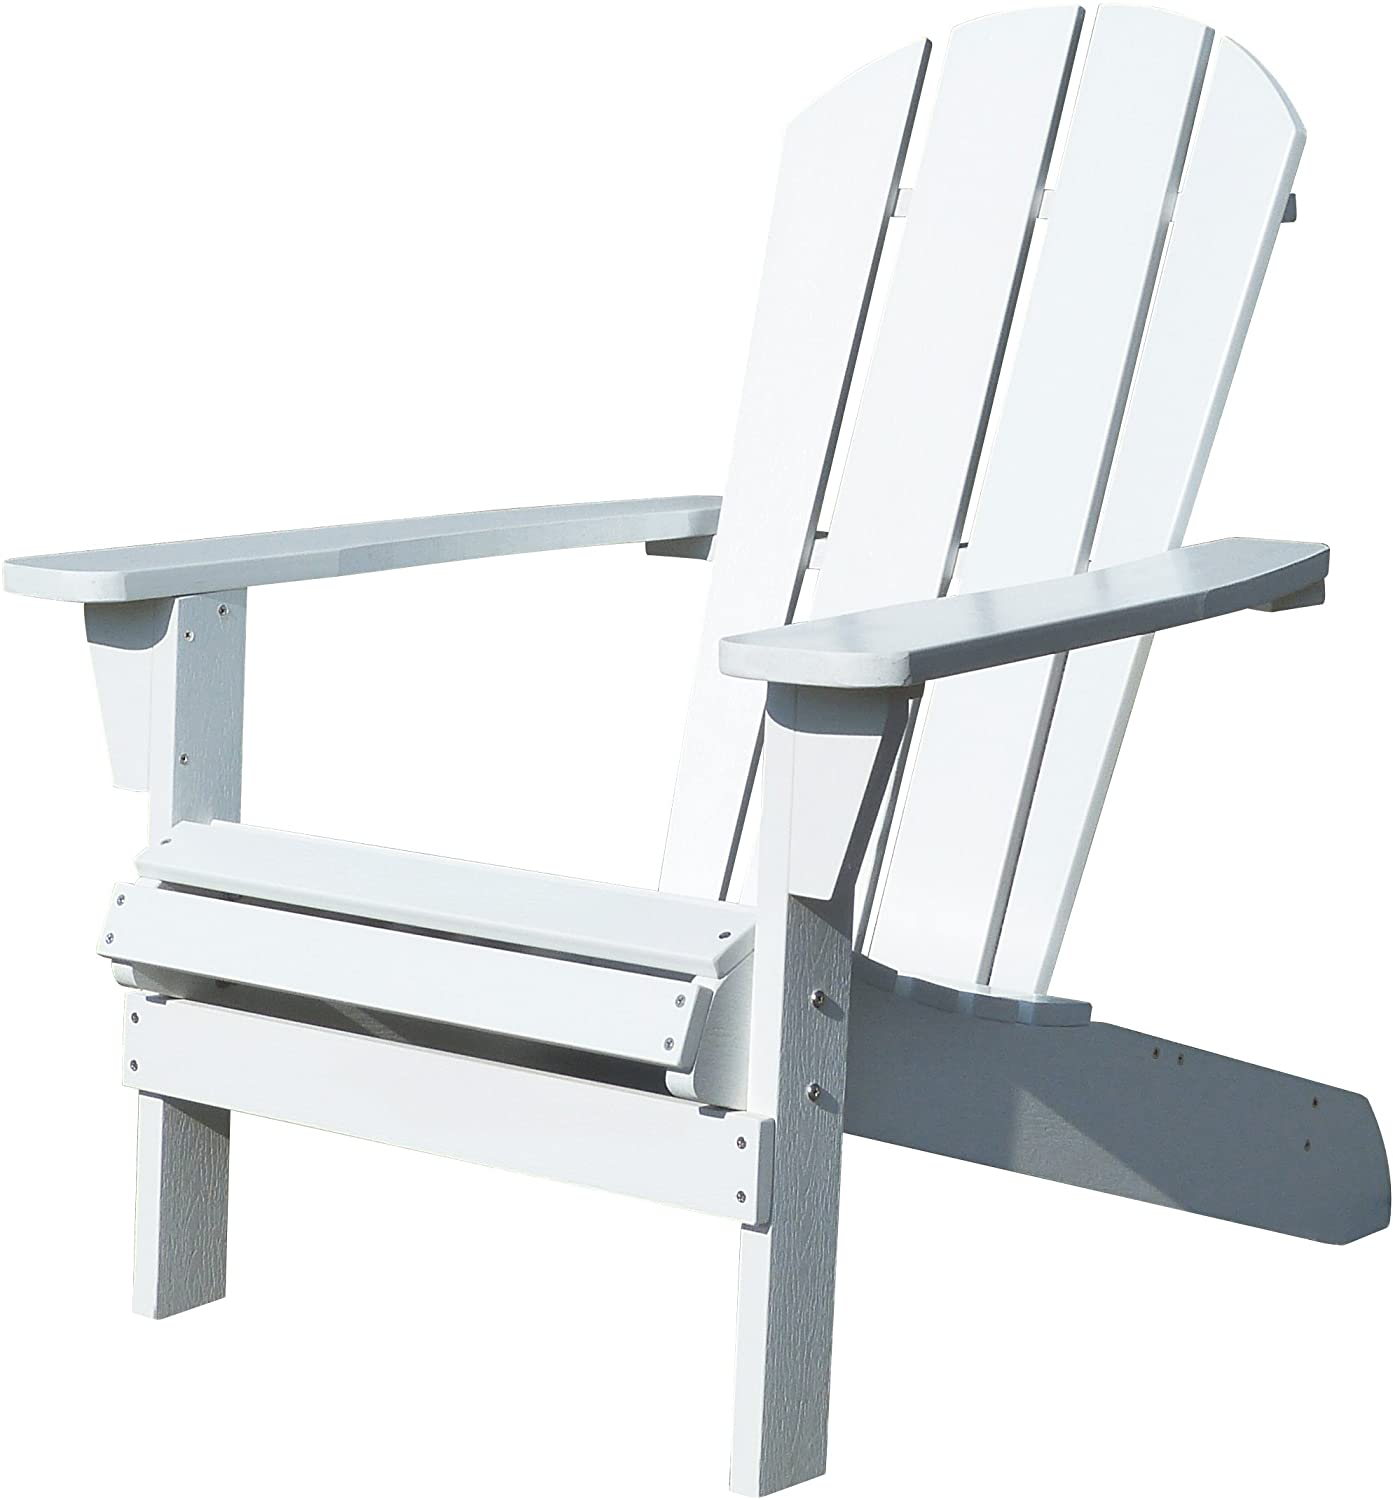 Plan Fauteuil Adirondack Beau northbeam Faux Wood Foldable Relaxed Adirondack Chair Outdoor Garden Lawn Deck Chair White